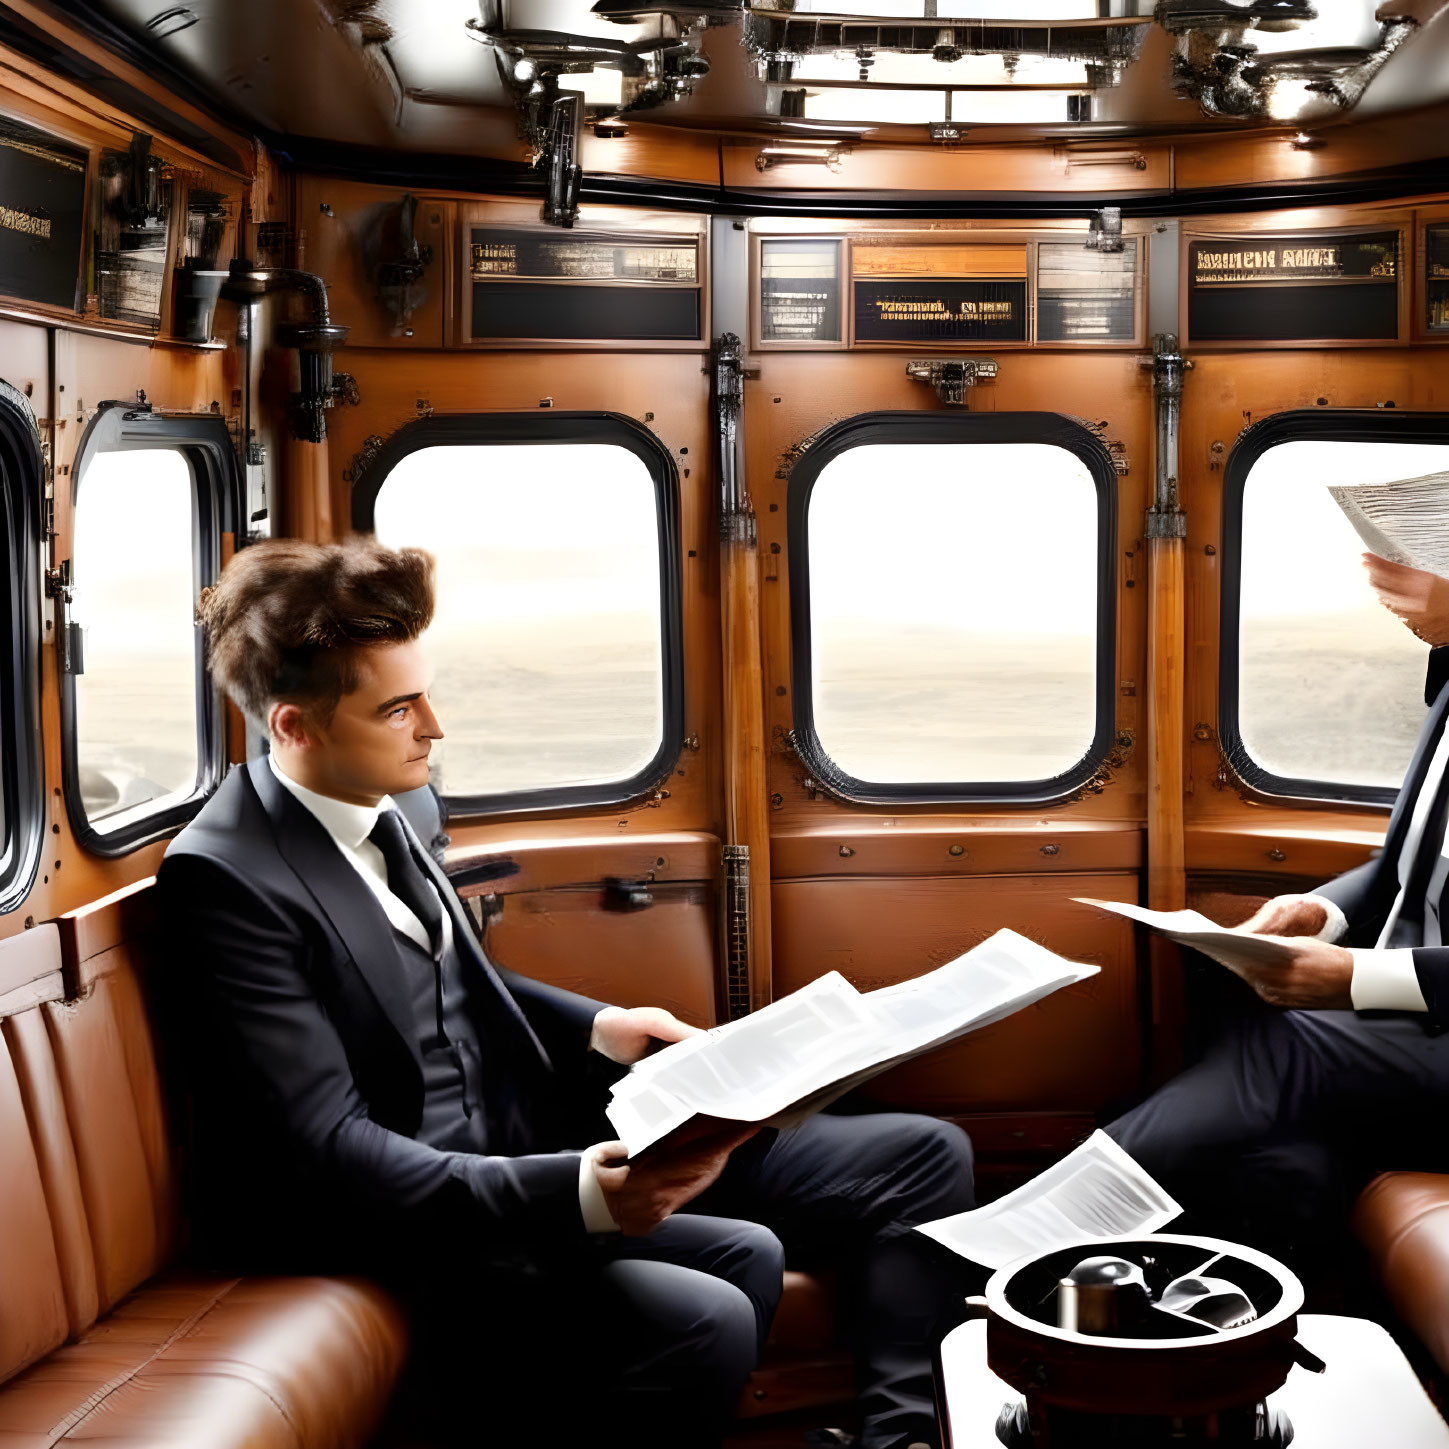 Two Men in Suits Inside Vintage Train Cabin with Leather Seats